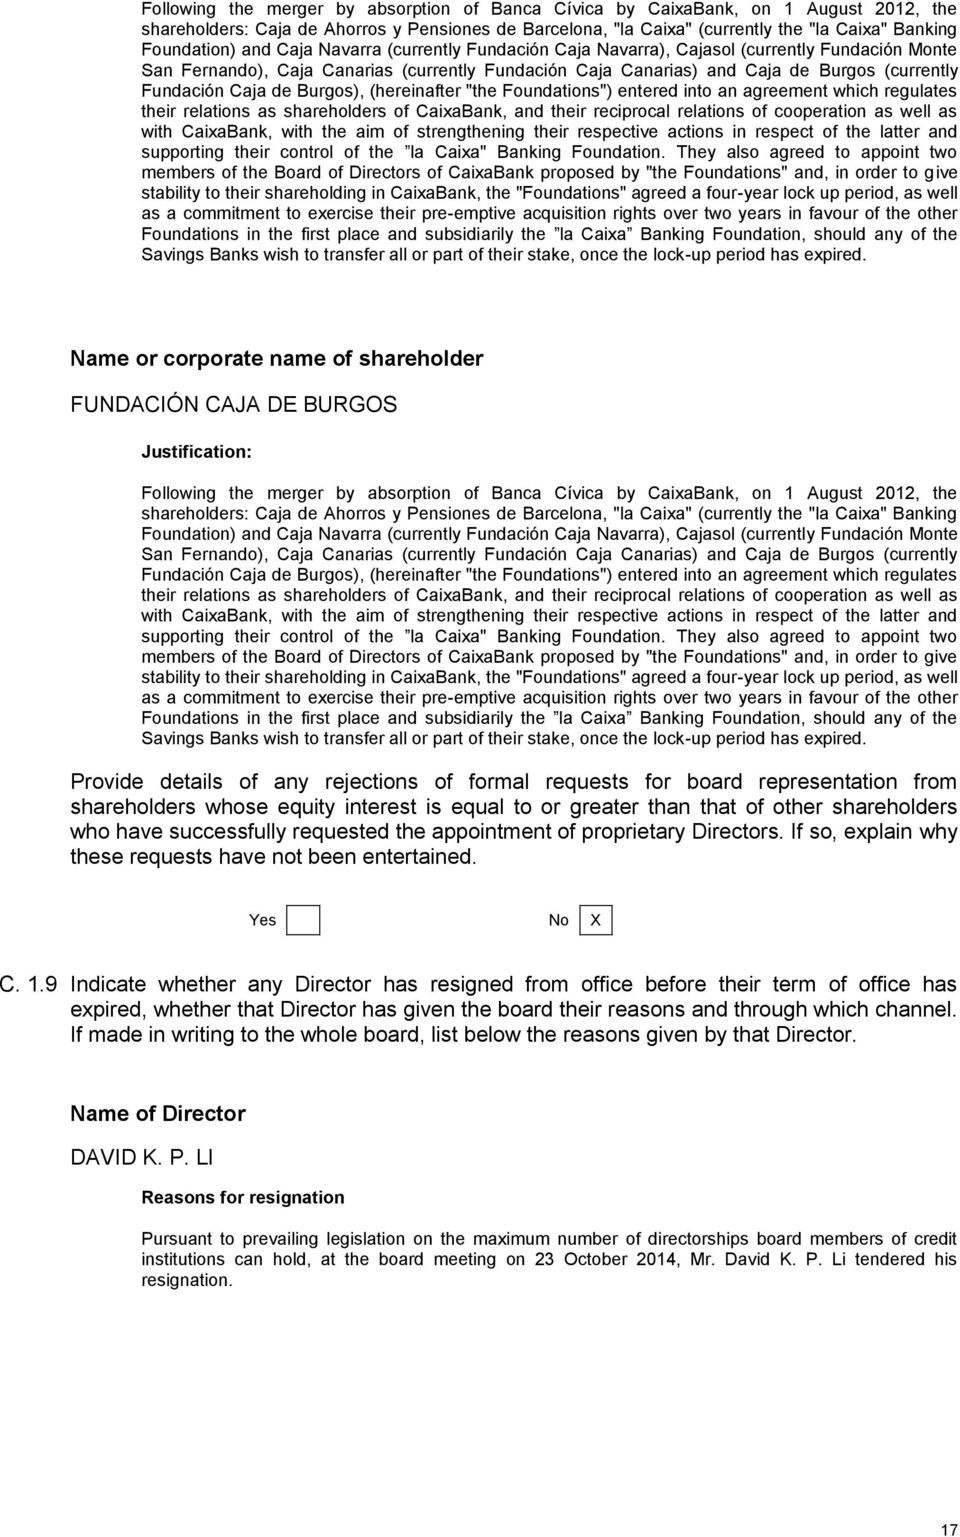 de Burgos), (hereinafter "the Foundations") entered into an agreement which regulates their relations as shareholders of CaixaBank, and their reciprocal relations of cooperation as well as with